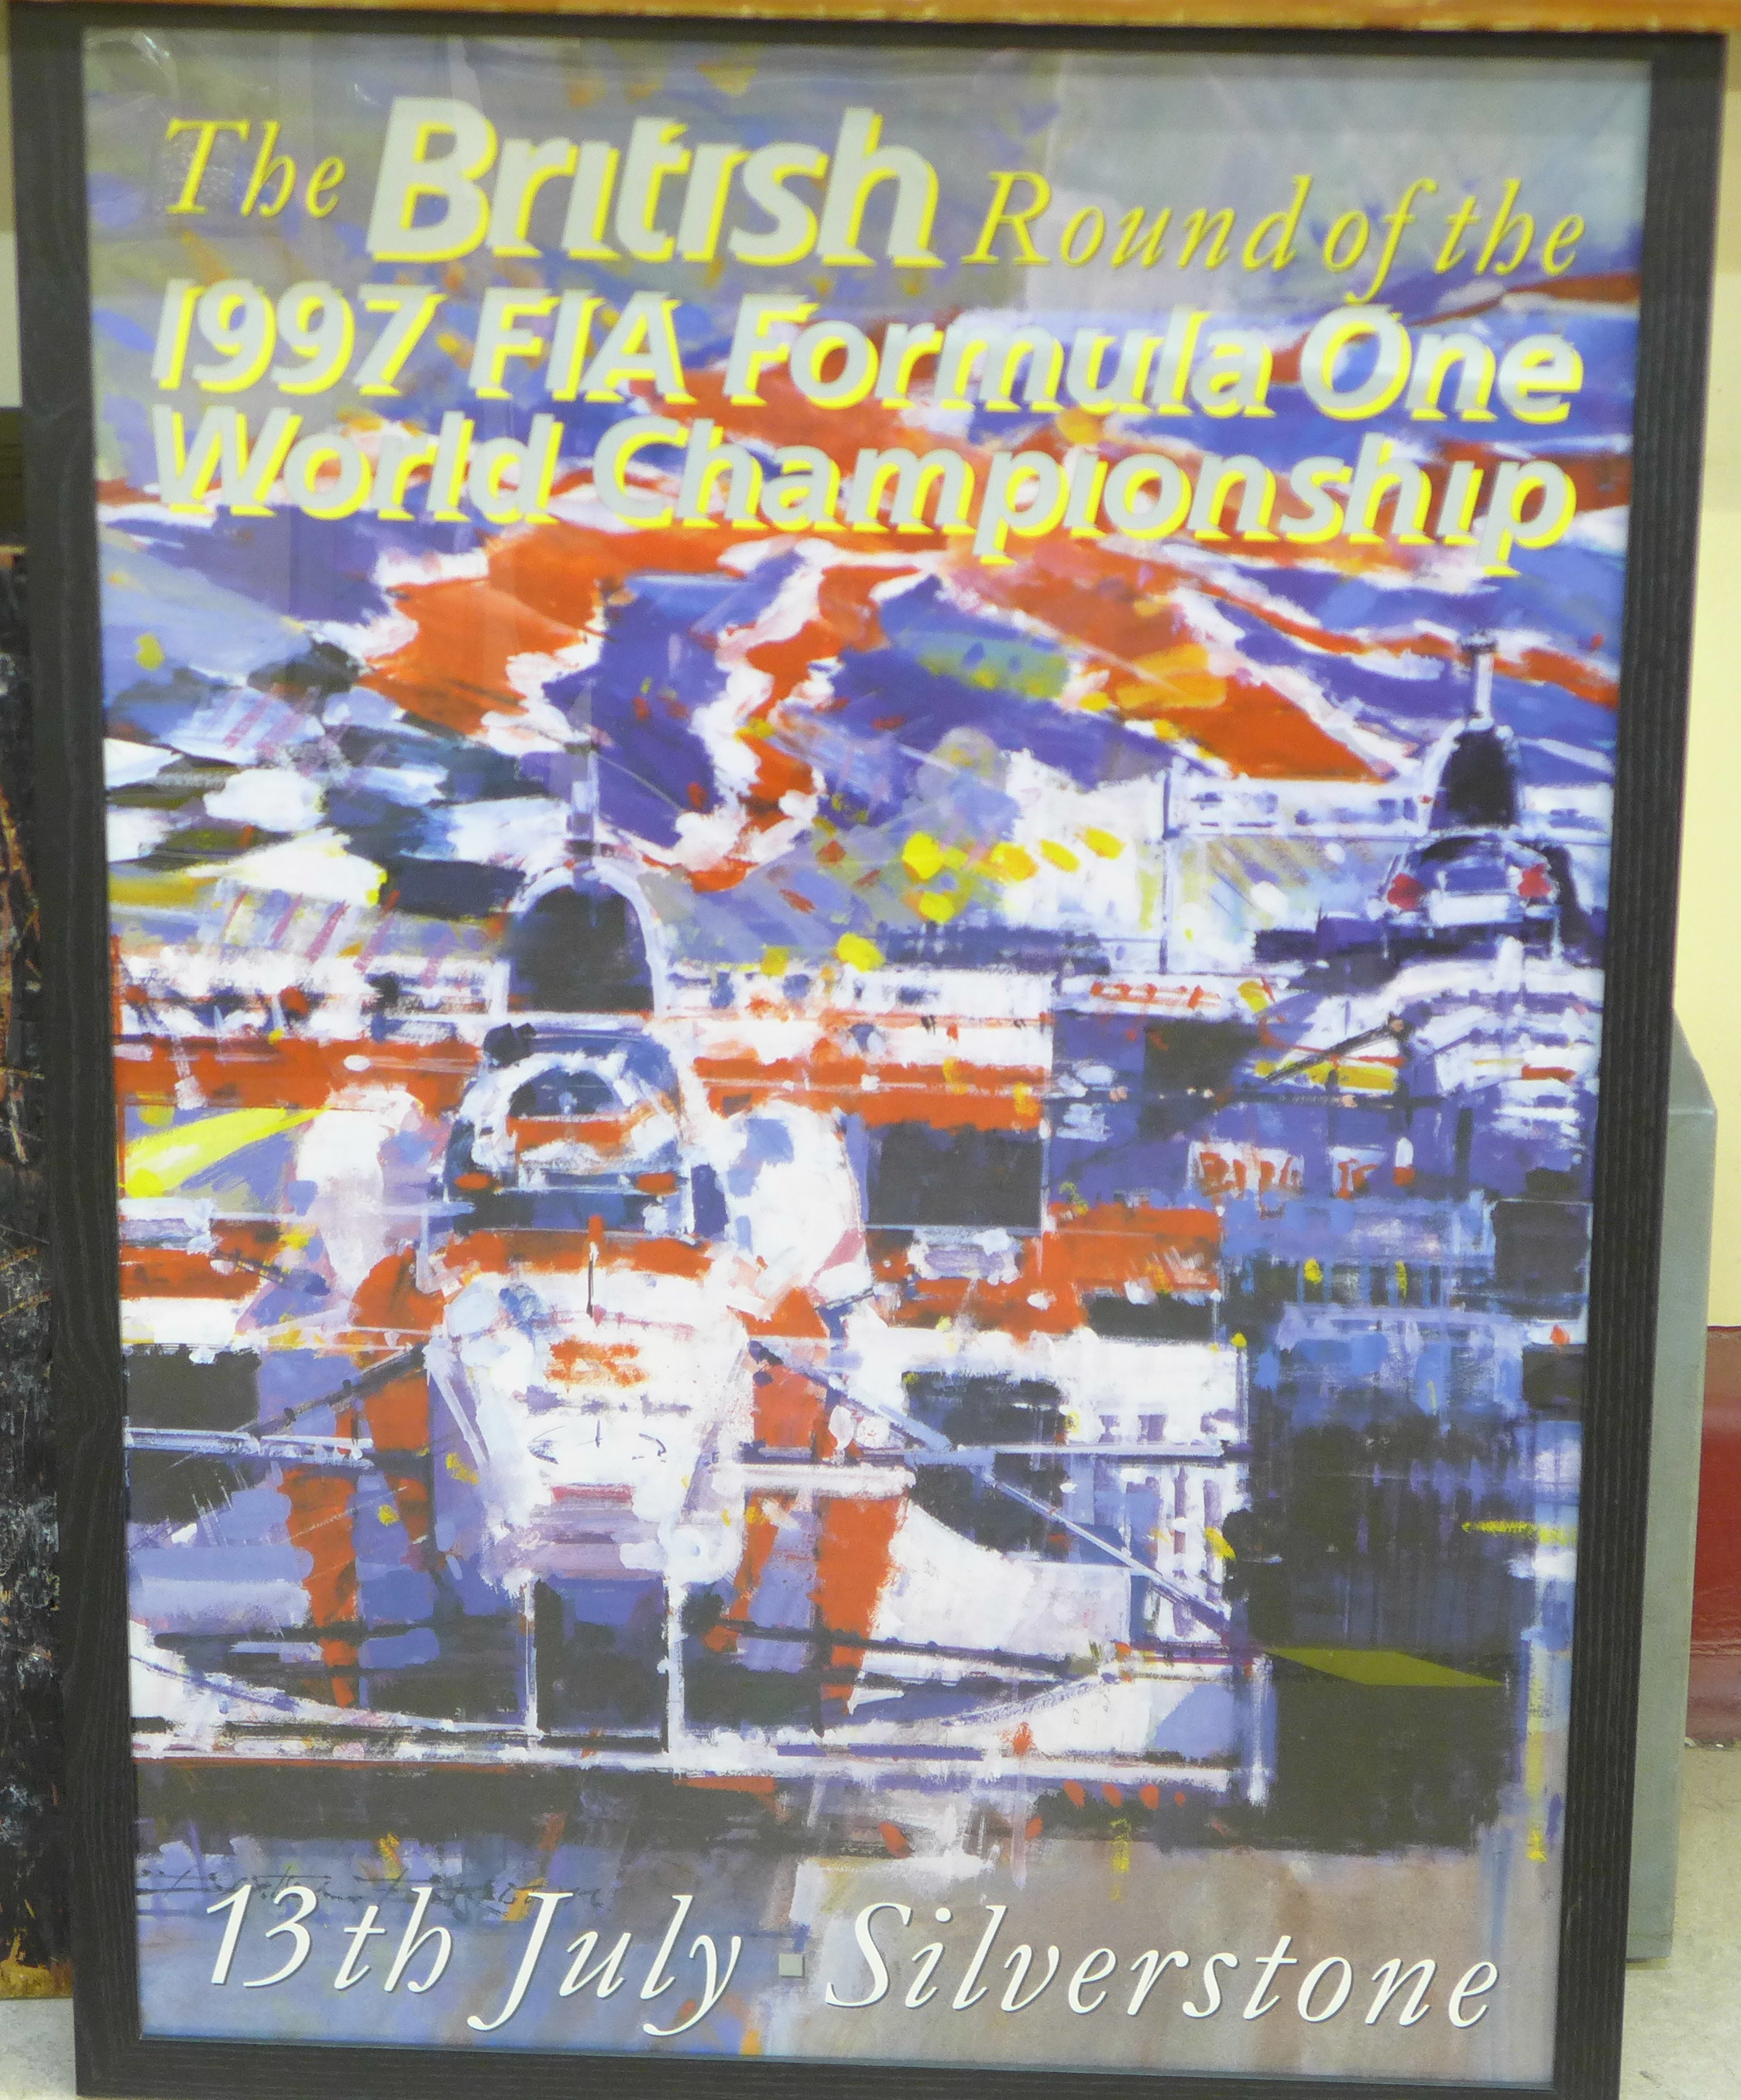 A large A1 framed colour poster for the 1997 British Grand Prix at Silverstone